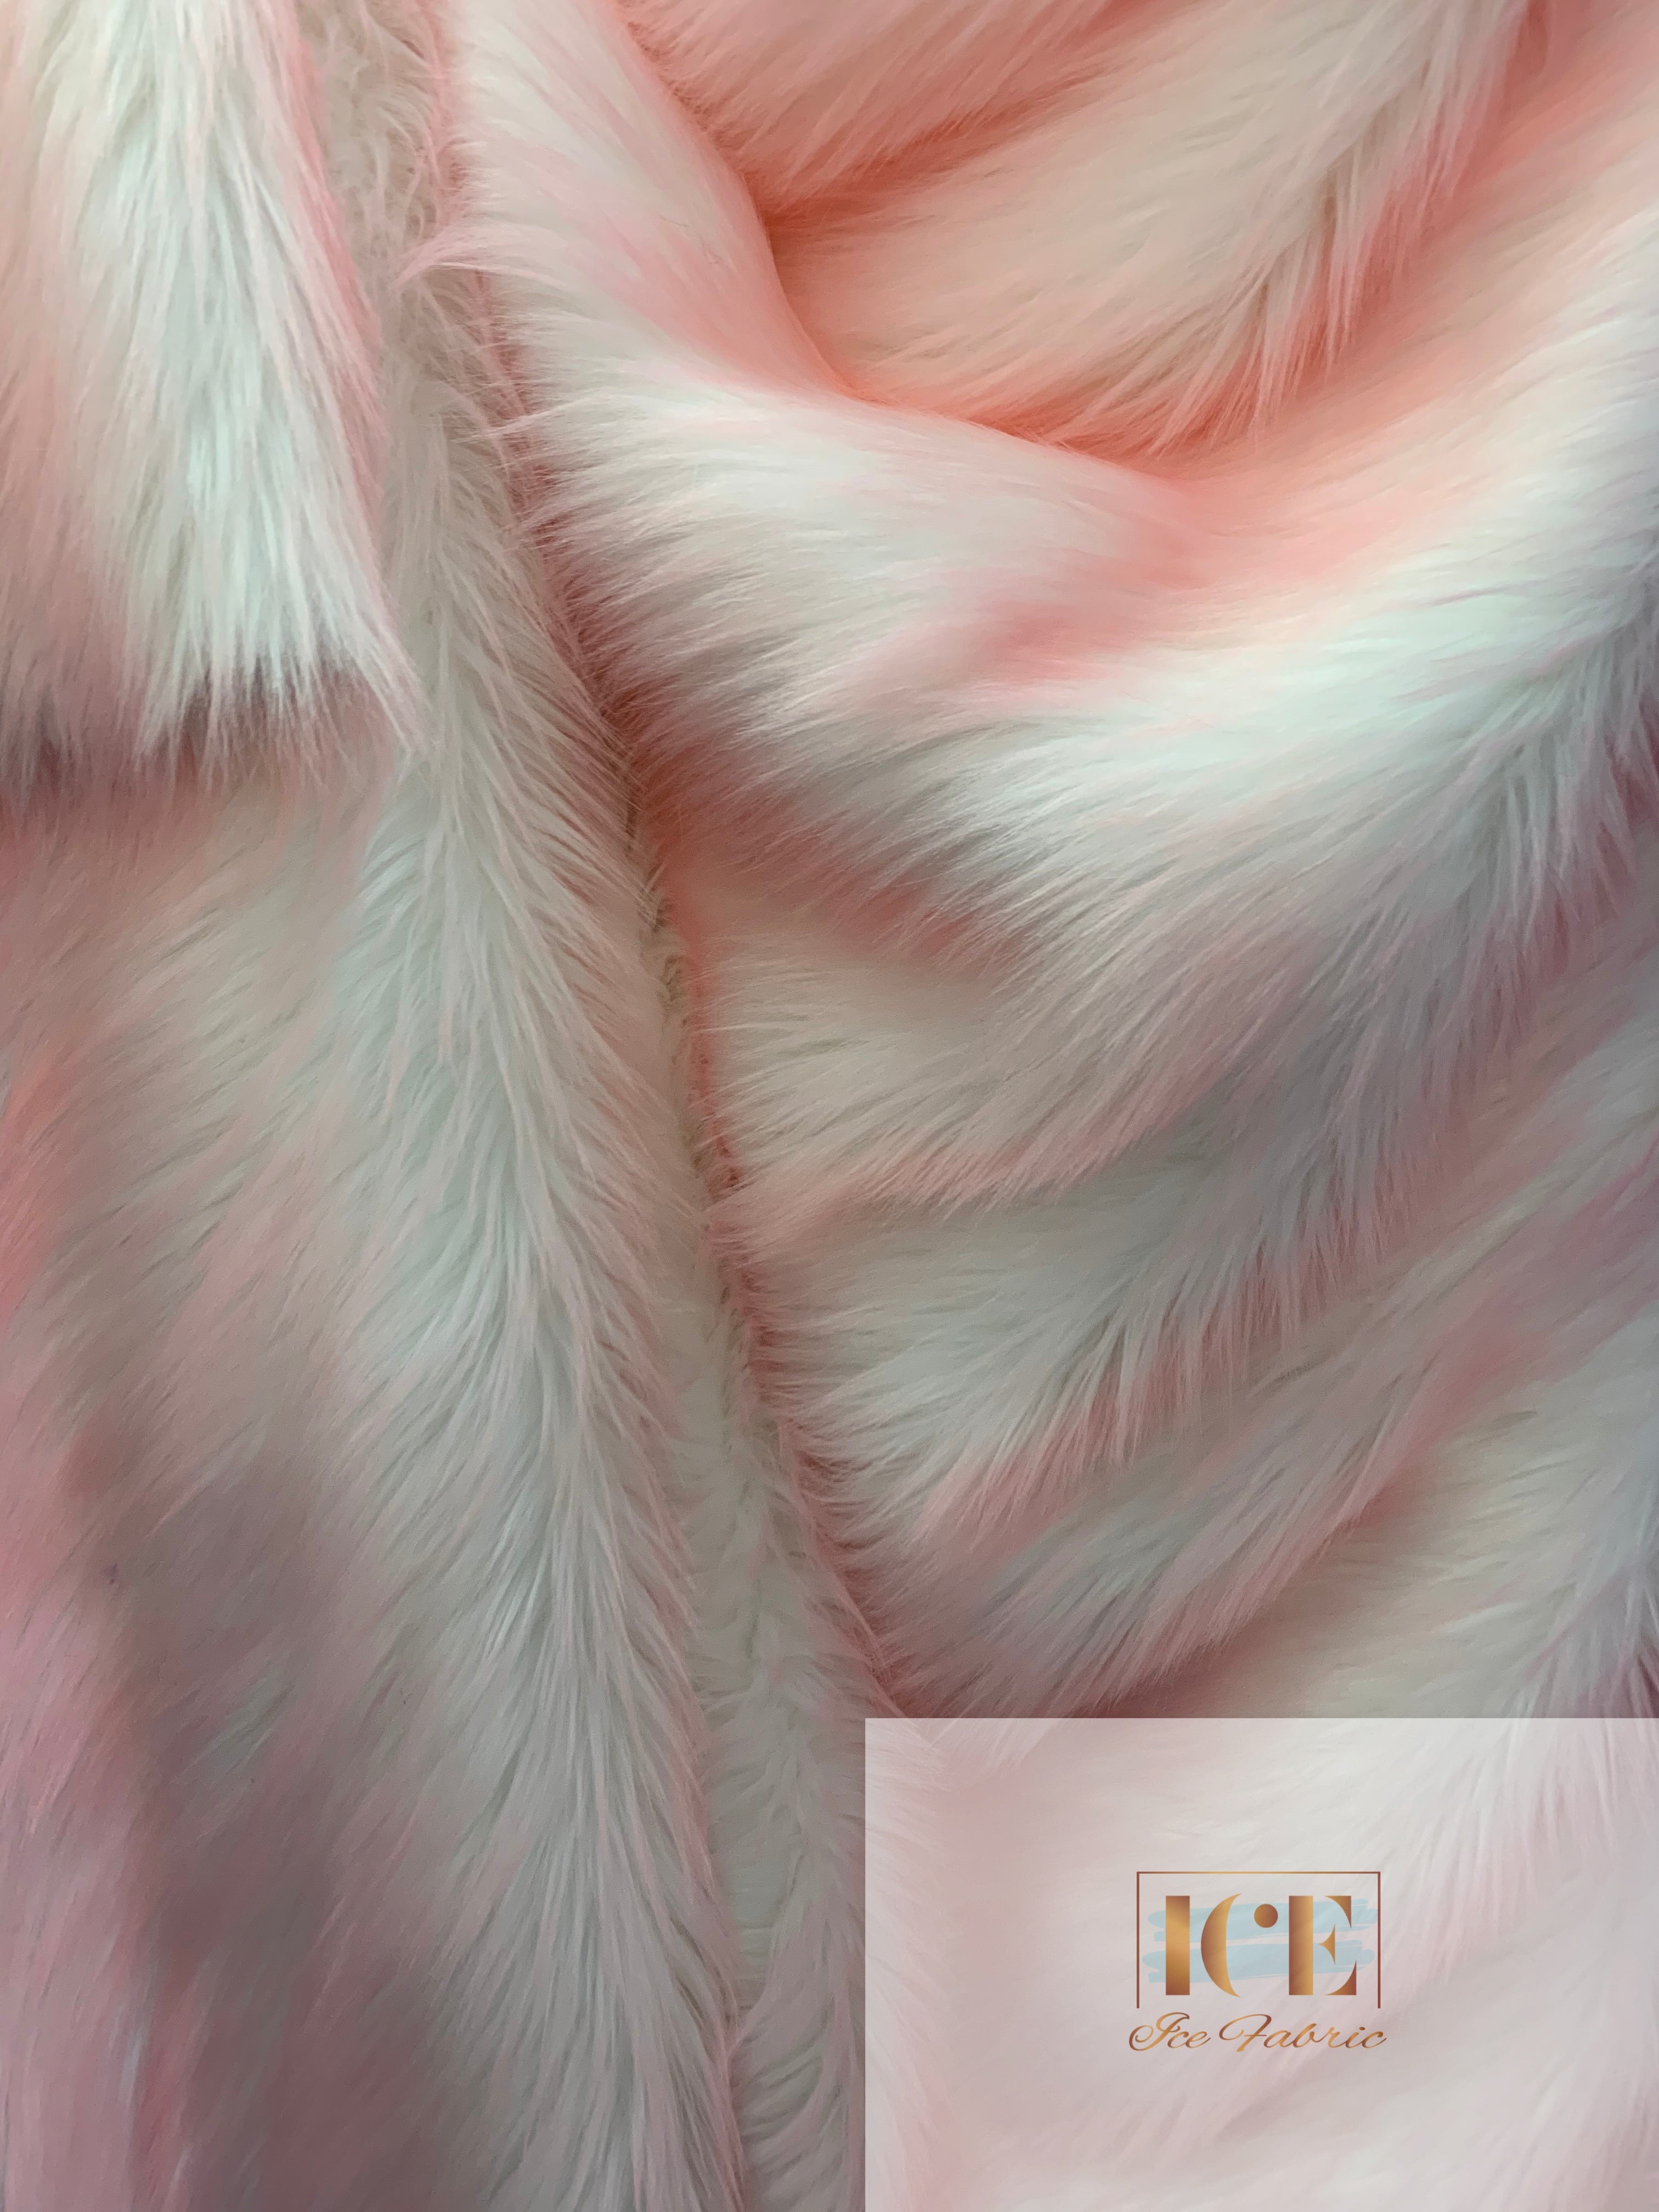 Canadian Fox 2 Tone Shaggy Long Pile Faux Fur Fabric For Blankets, Costumes, Bed SpreadICEFABRICICE FABRICSLight PinkBy The Yard (60 inches Wide)Canadian Fox 2 Tone Shaggy Long Pile Faux Fur Fabric For Blankets, Costumes, Bed Spread ICEFABRIC Light Pink